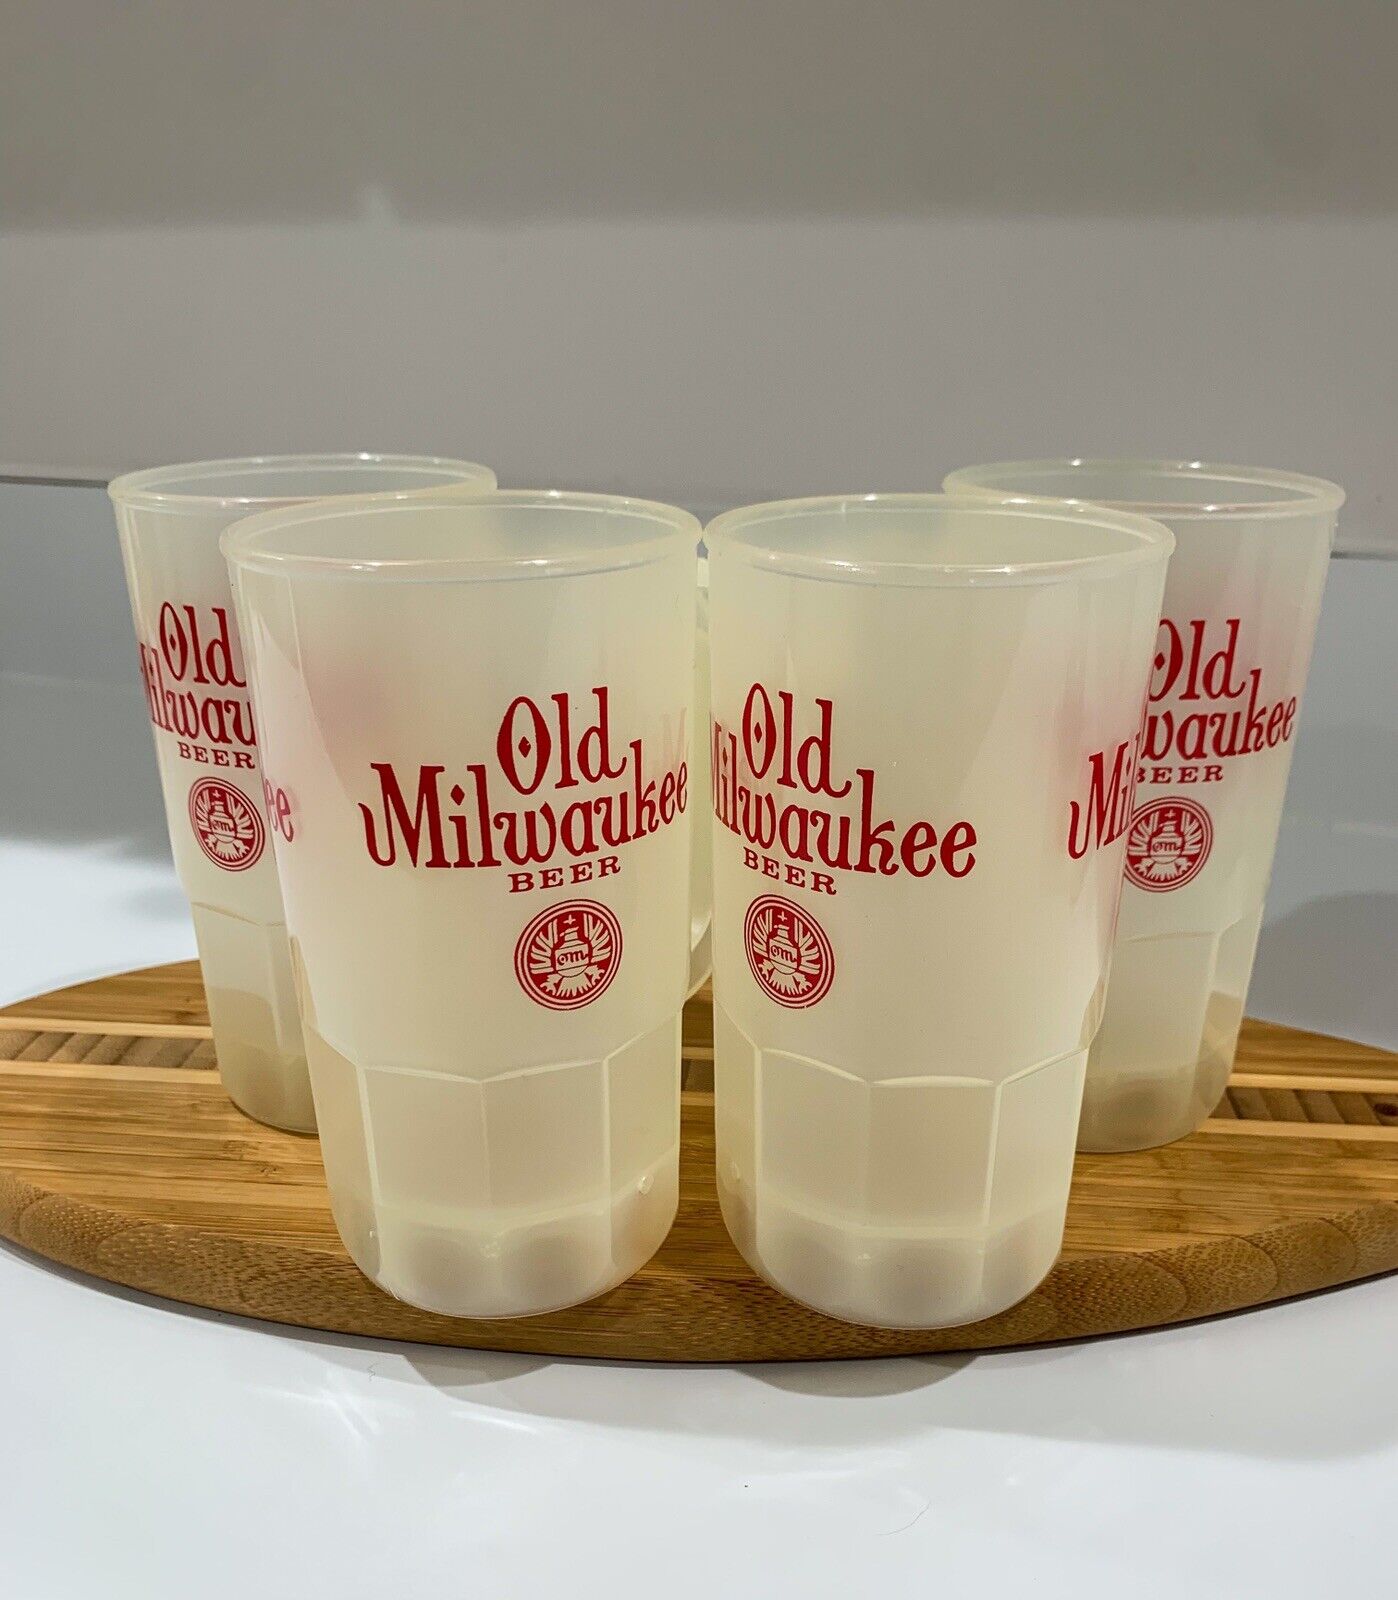 4 Old Milwaukee Beer Mugs Plastic Cups Tumblers With Handle 5.25” Tall USA Vtg